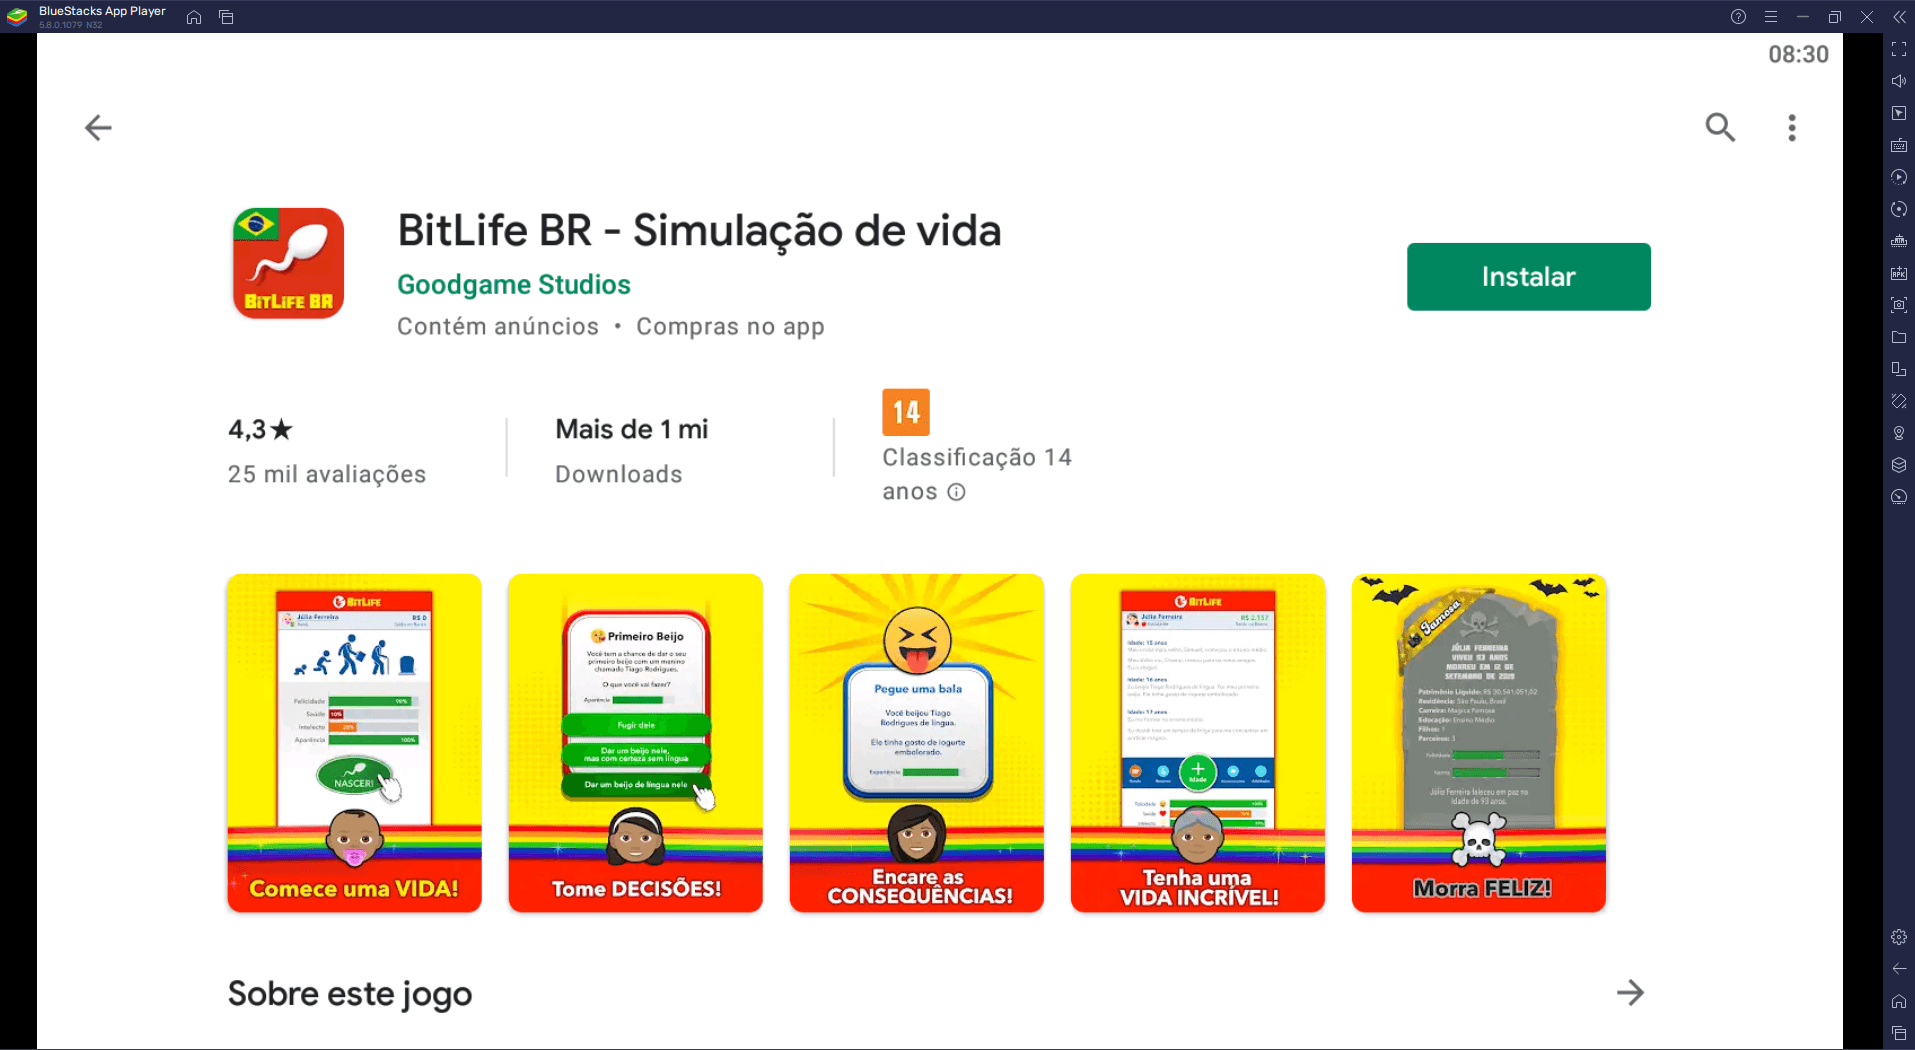 Goodgame Studios on X: BitLife ES - Simulador de vida rocks the Latin  American gaming charts, occupying top 10 game download positions on the  Apple App Store and Google Play Store in